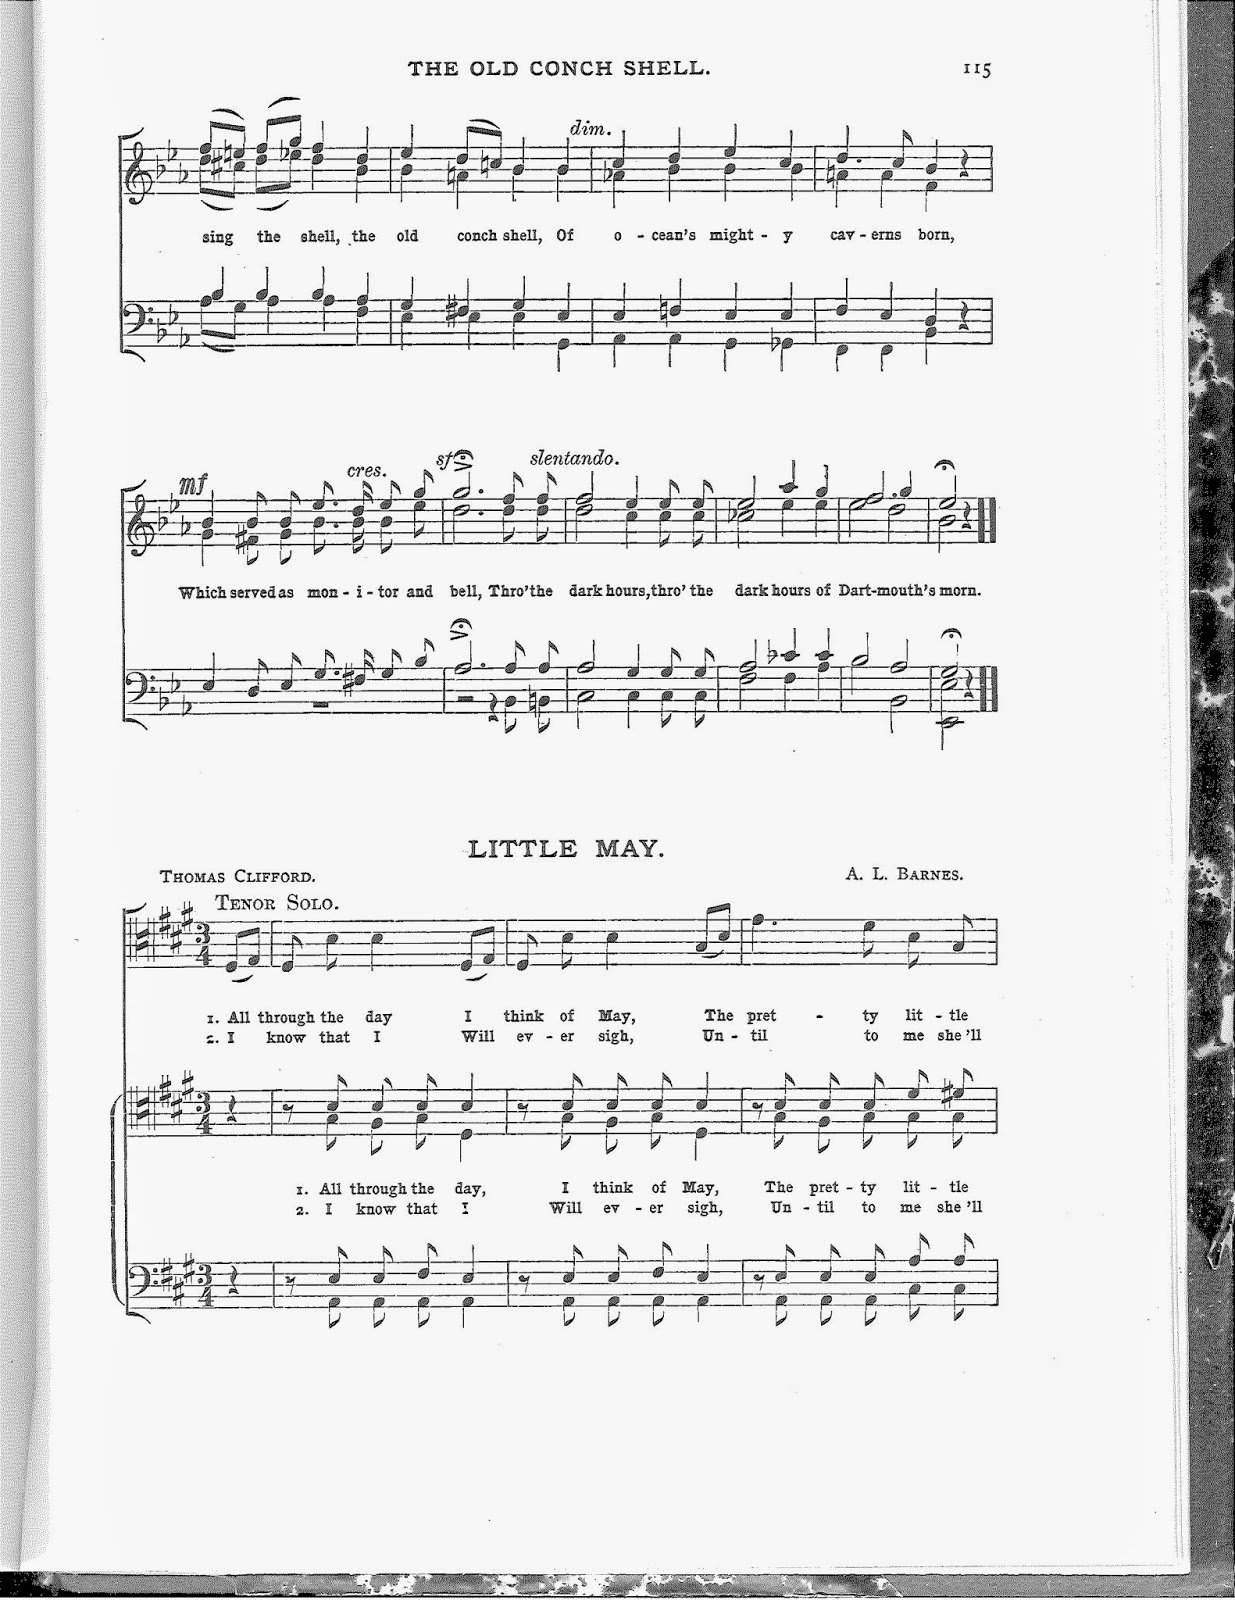 A second page of sheet music.